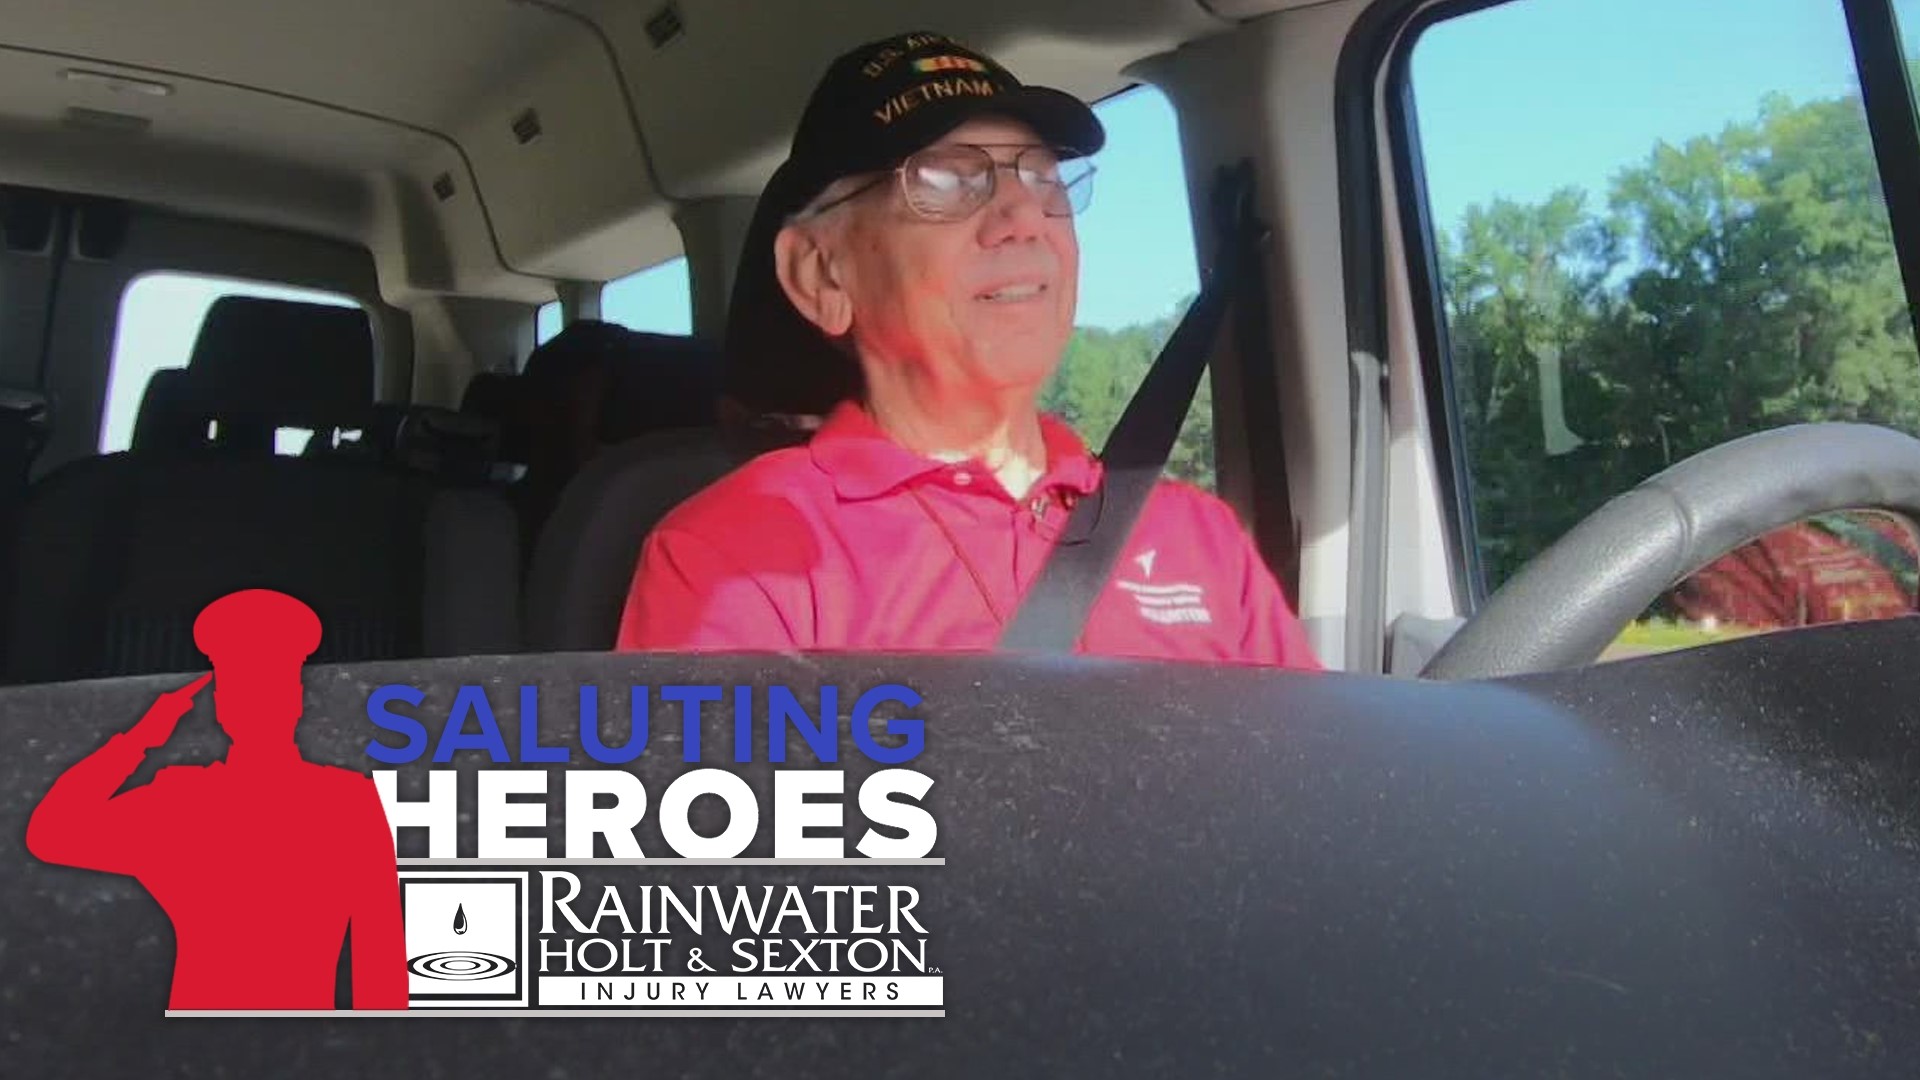 The Disabled American Veterans of Arkansas provides free shuttles to medical appointments for veterans. But, in these tough times, they need some help too.